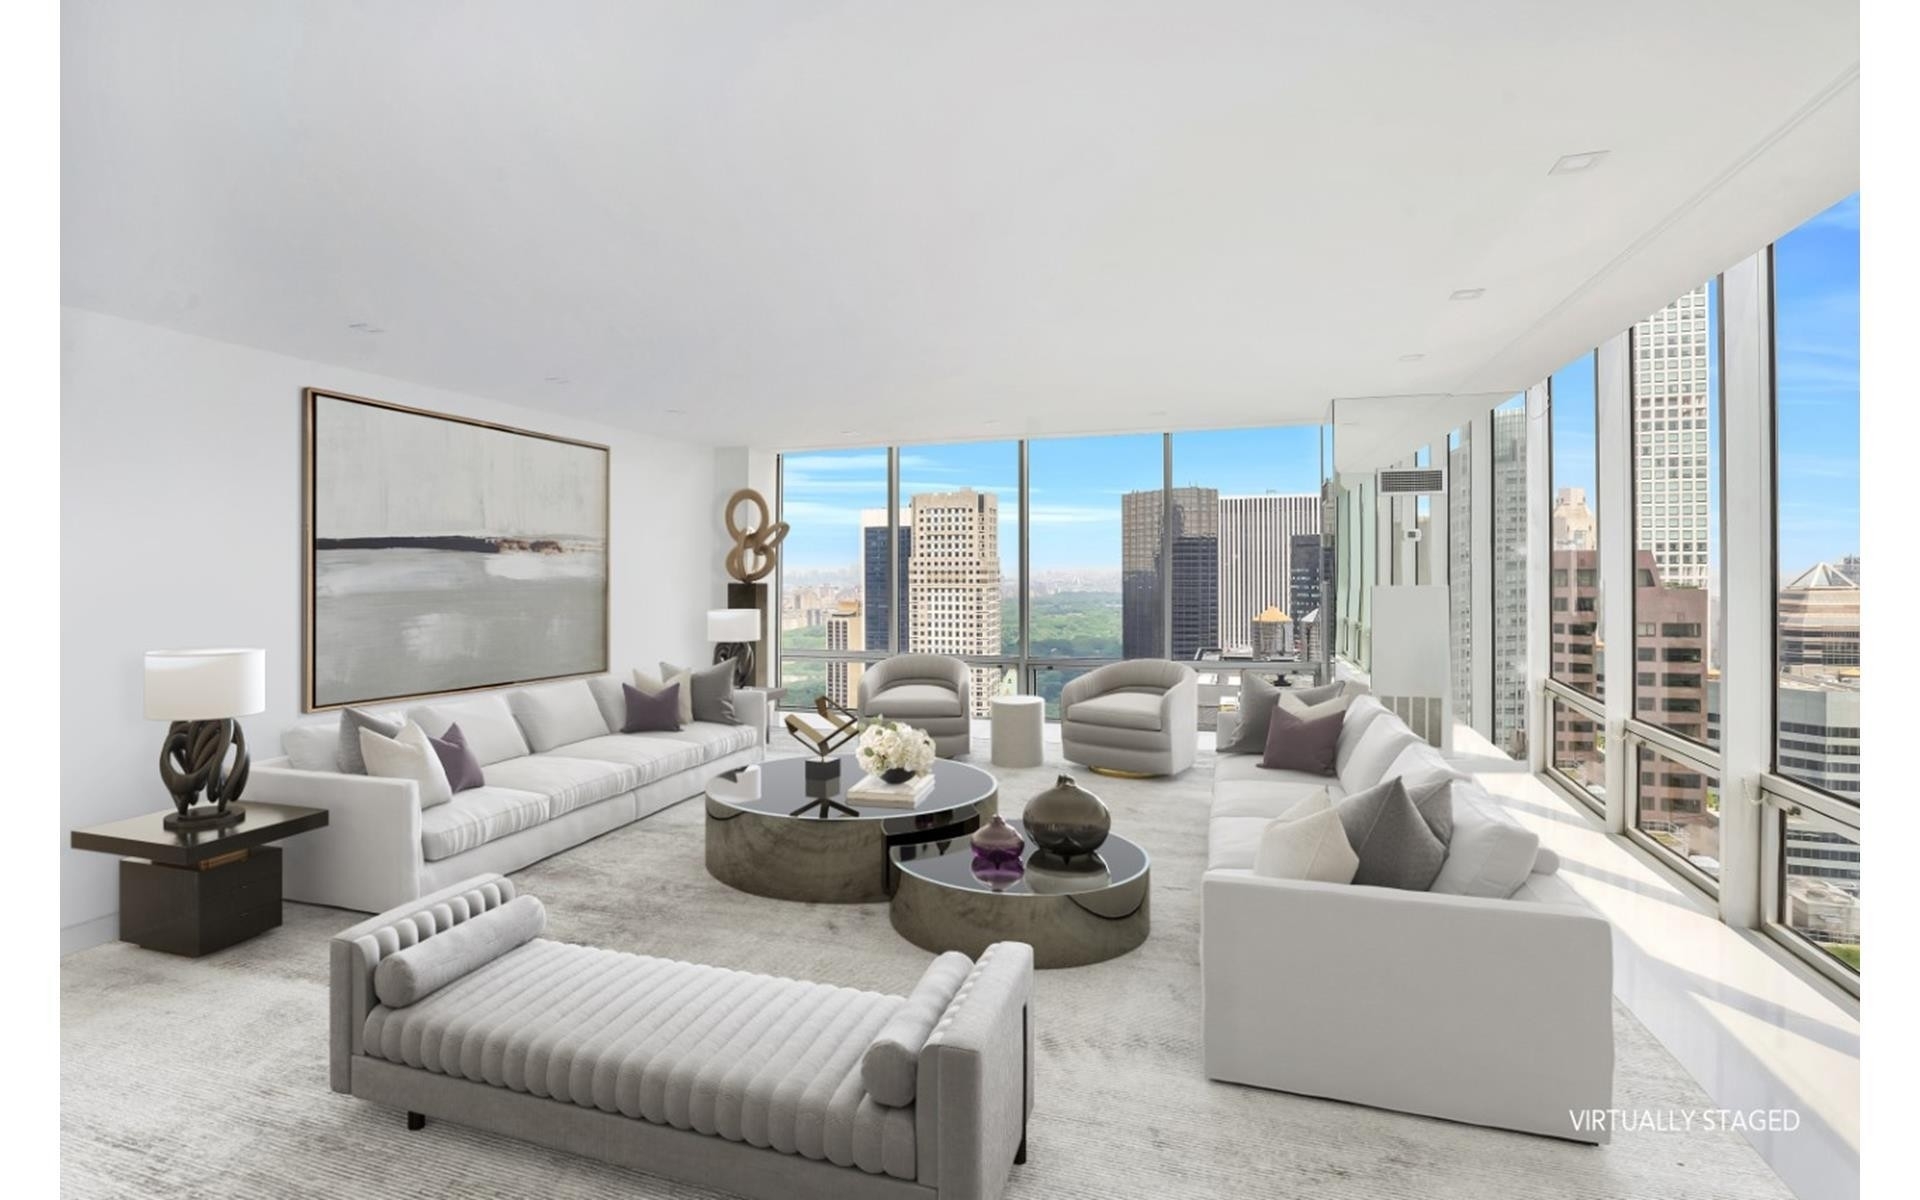 Condominium for Sale at Olympic Tower, 641 FIFTH AVE, 46/47C Turtle Bay, New York, NY 10022